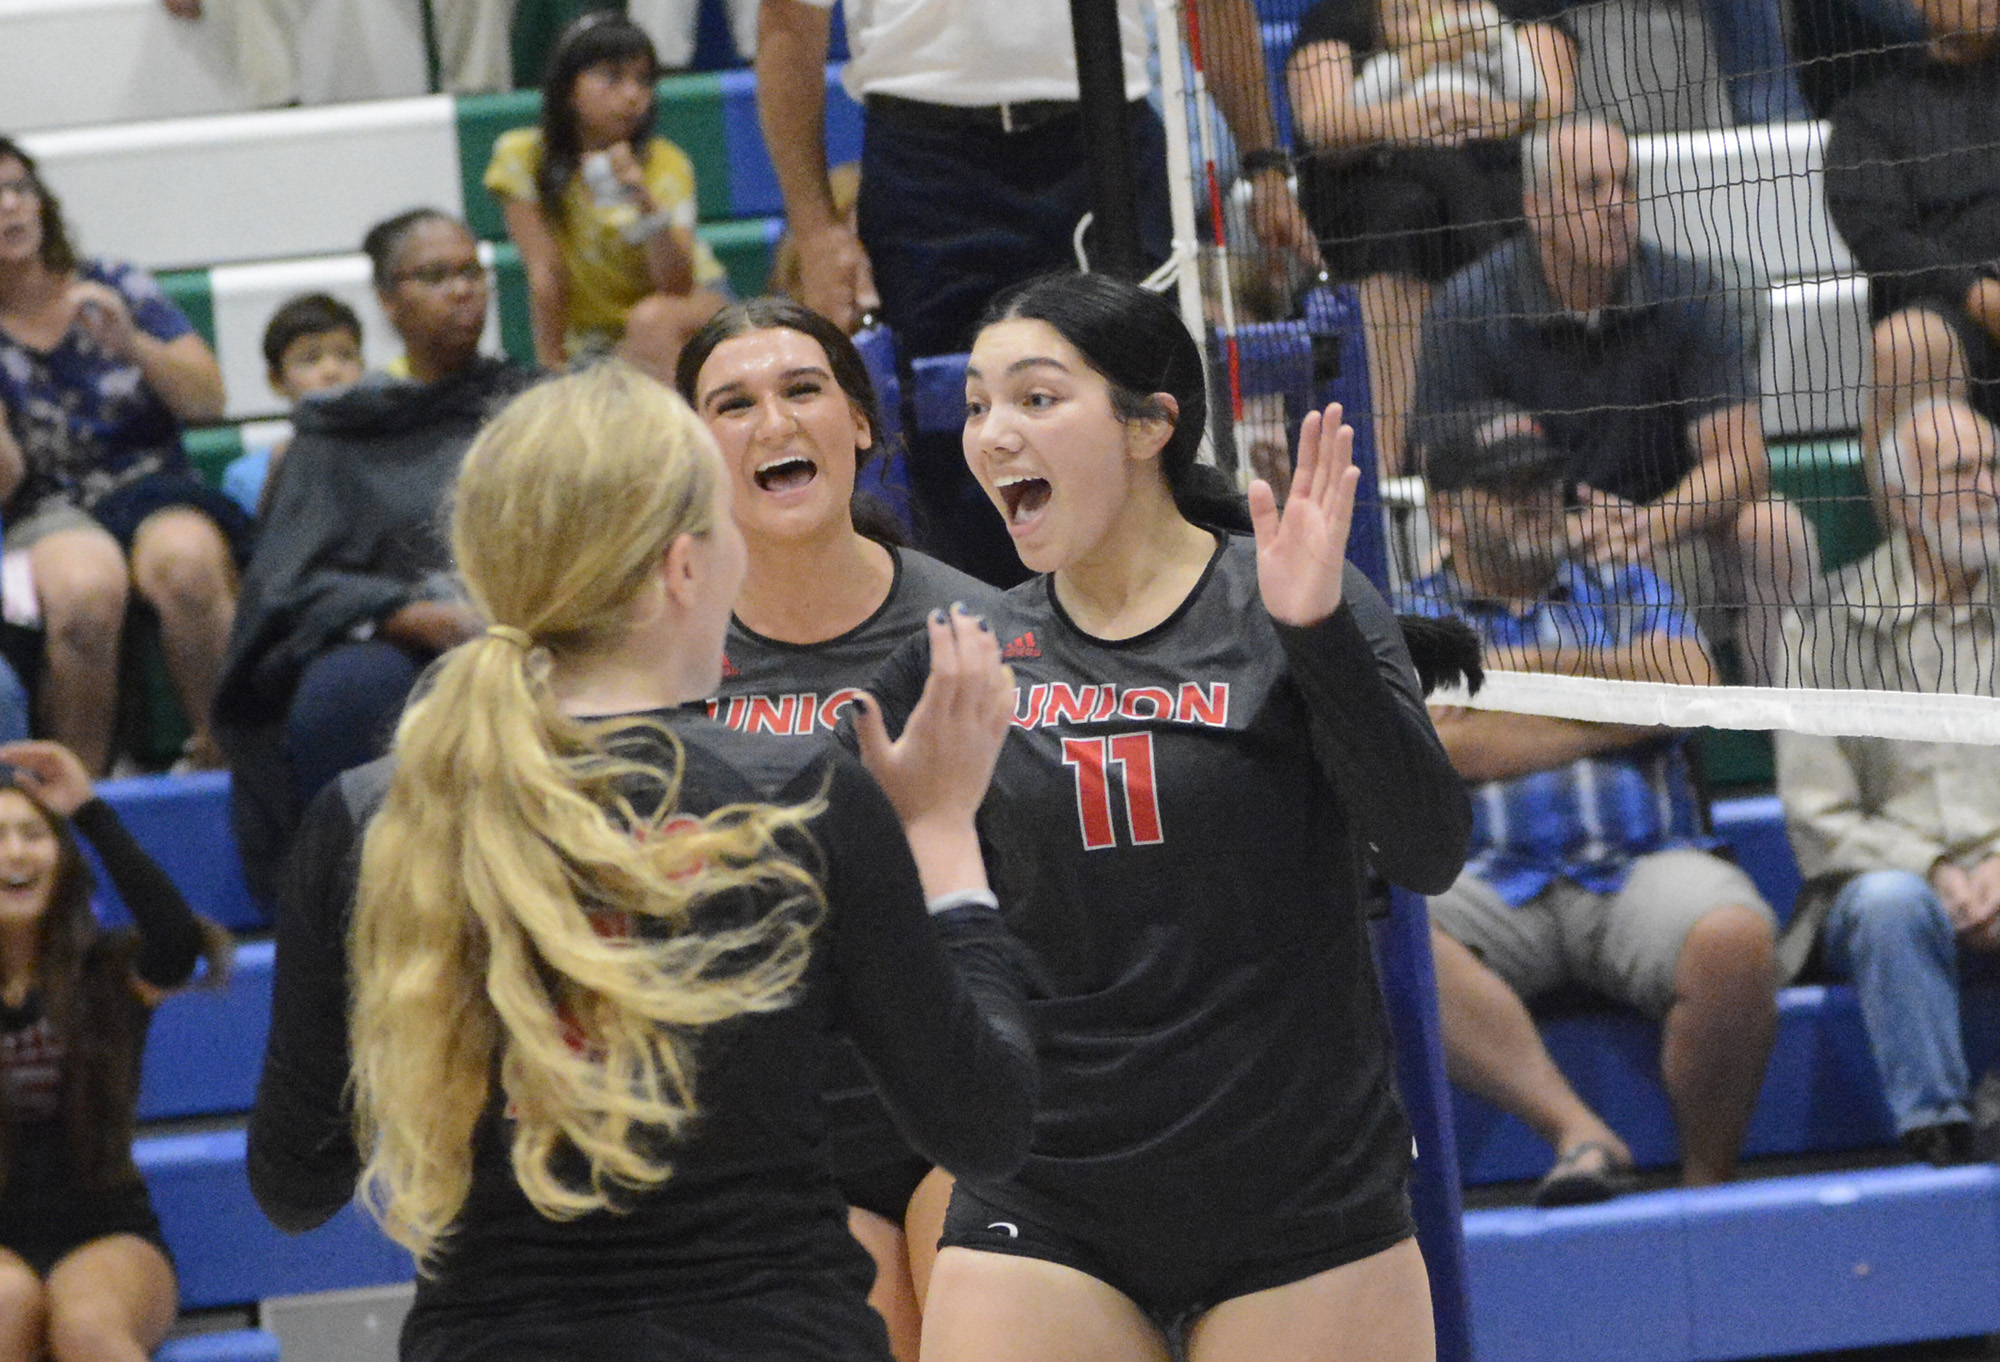 Union’s Ruby Ochoa (11) celebrates a point with her teammates during the Titans’ match at Mountain View on Thursday, Sept. 8, 2022.